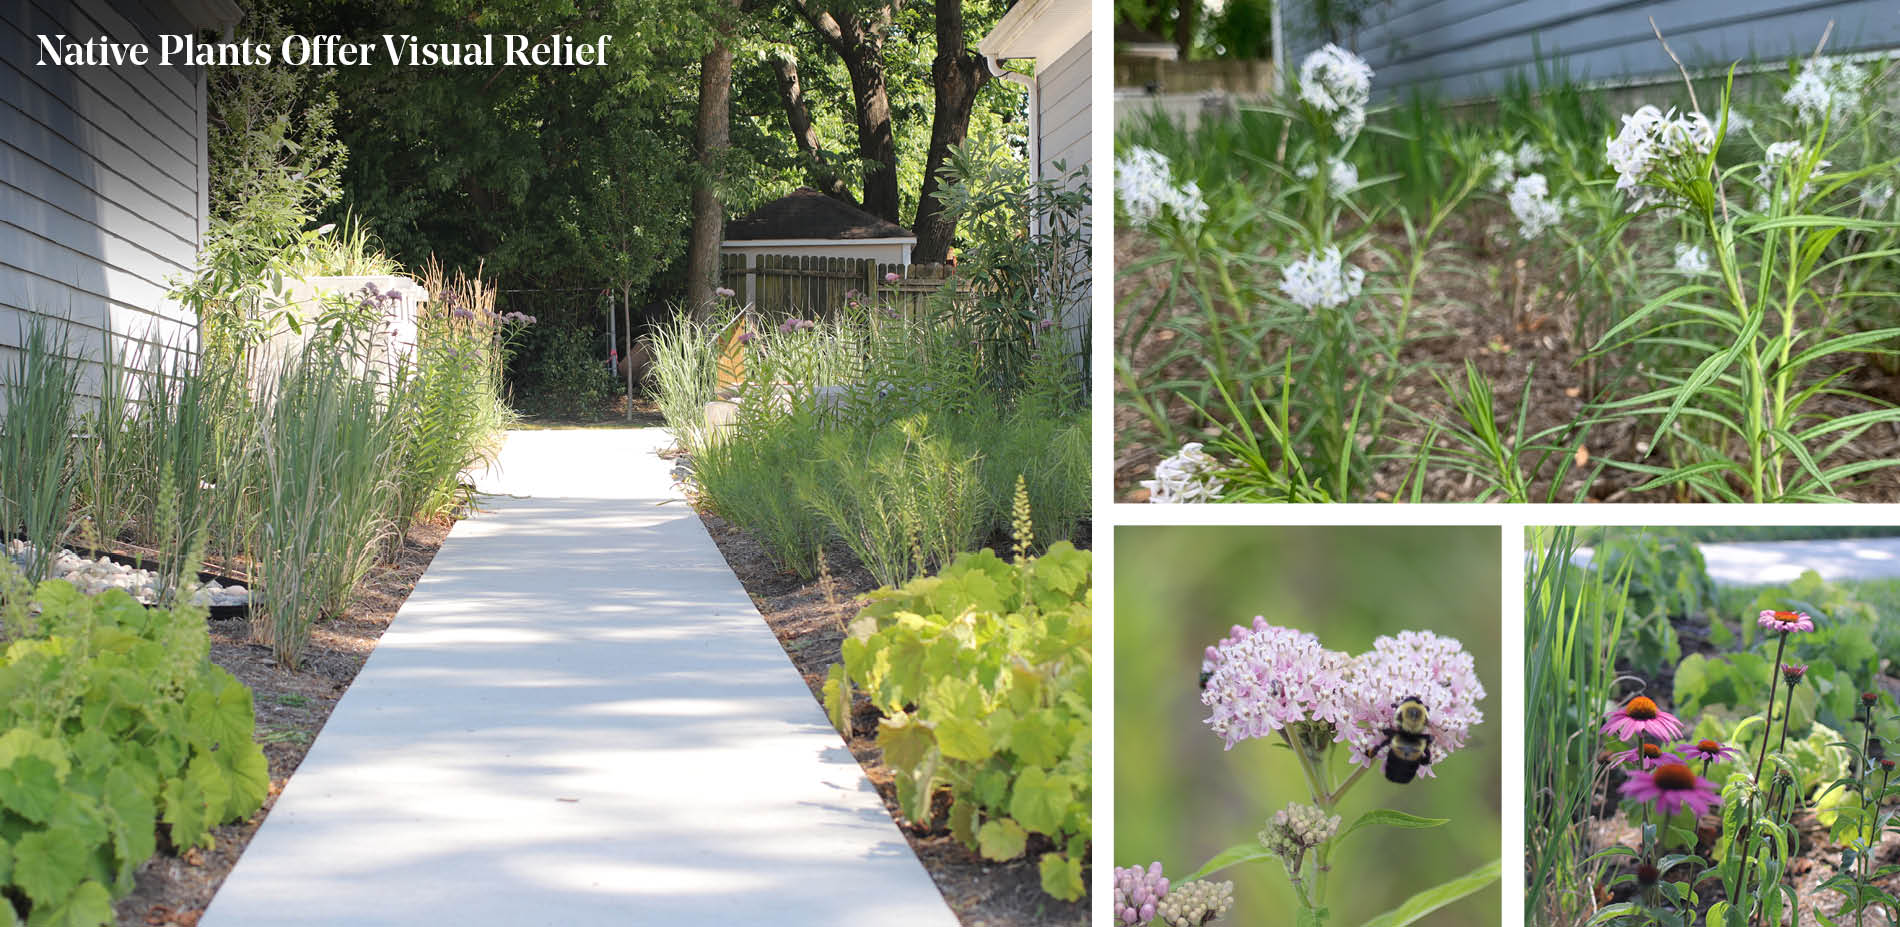 Native Plants Offer Visual Relief